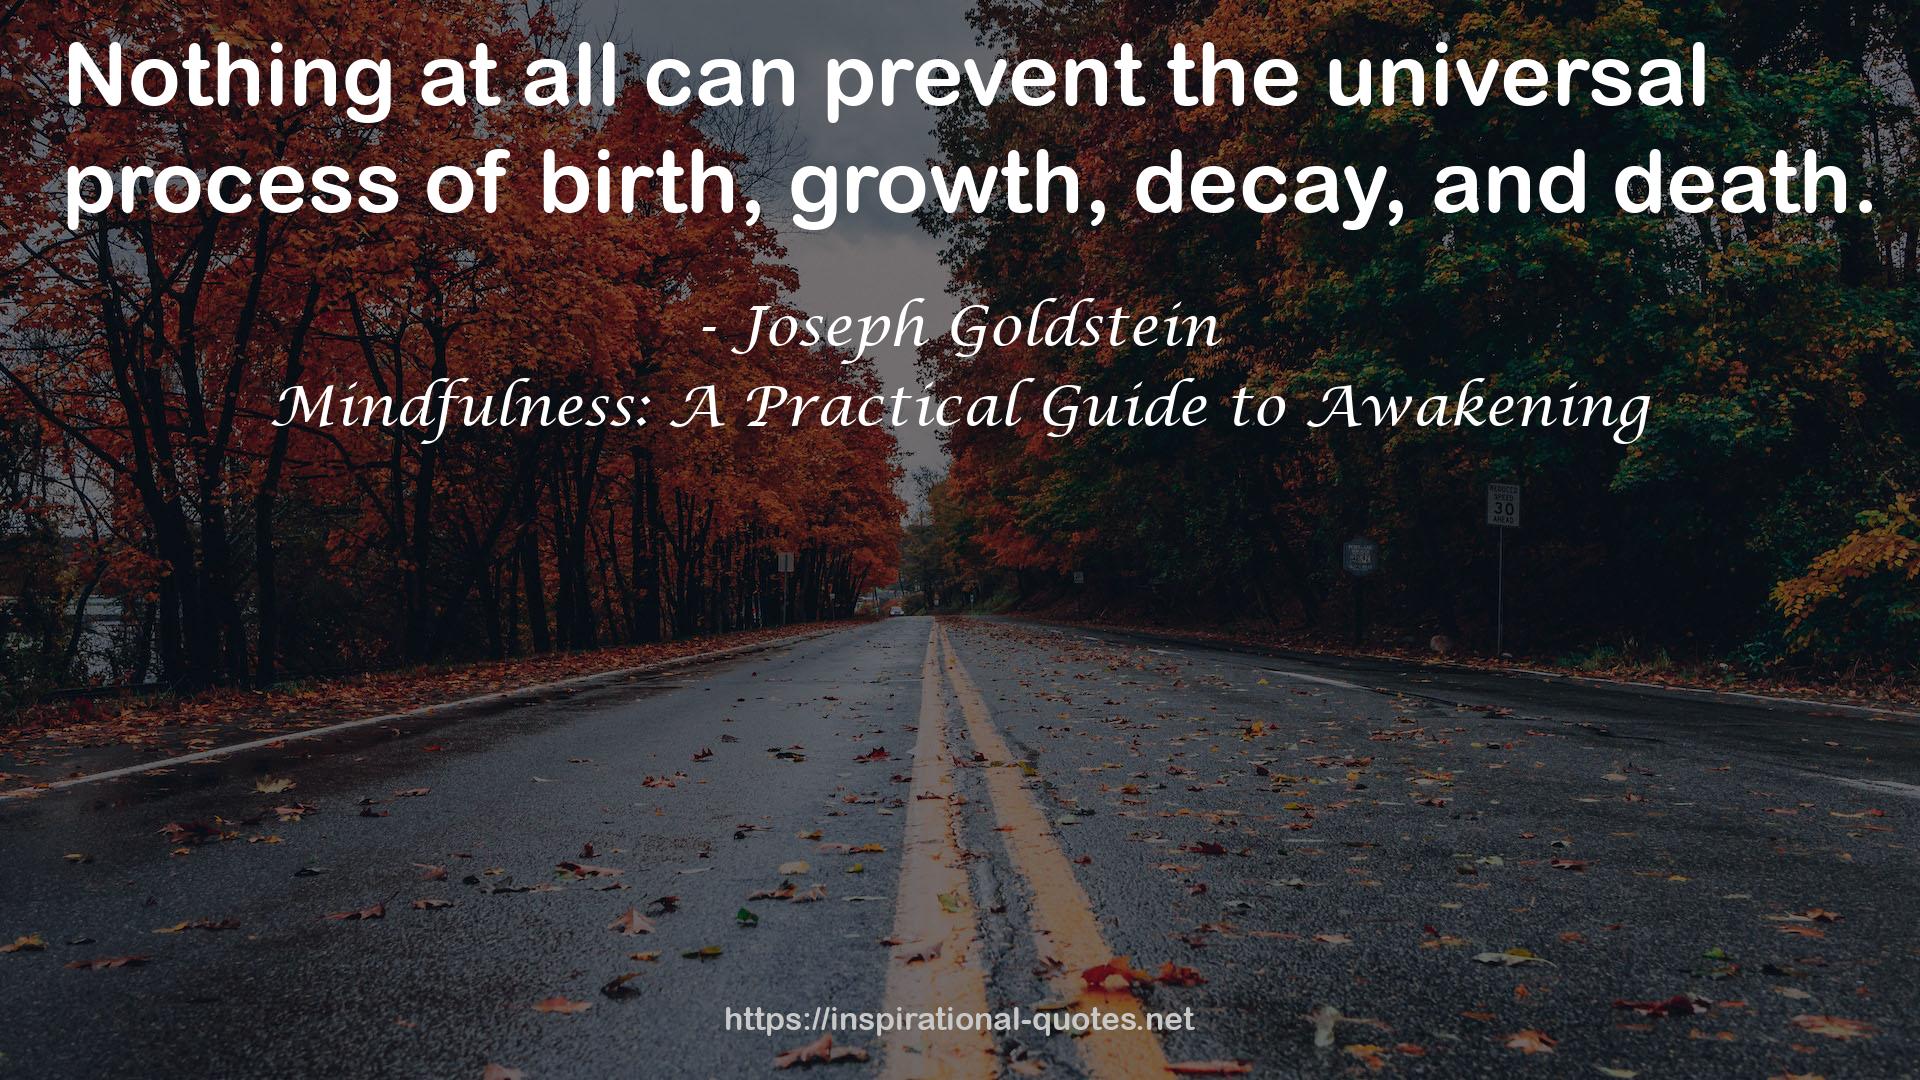 Mindfulness: A Practical Guide to Awakening QUOTES